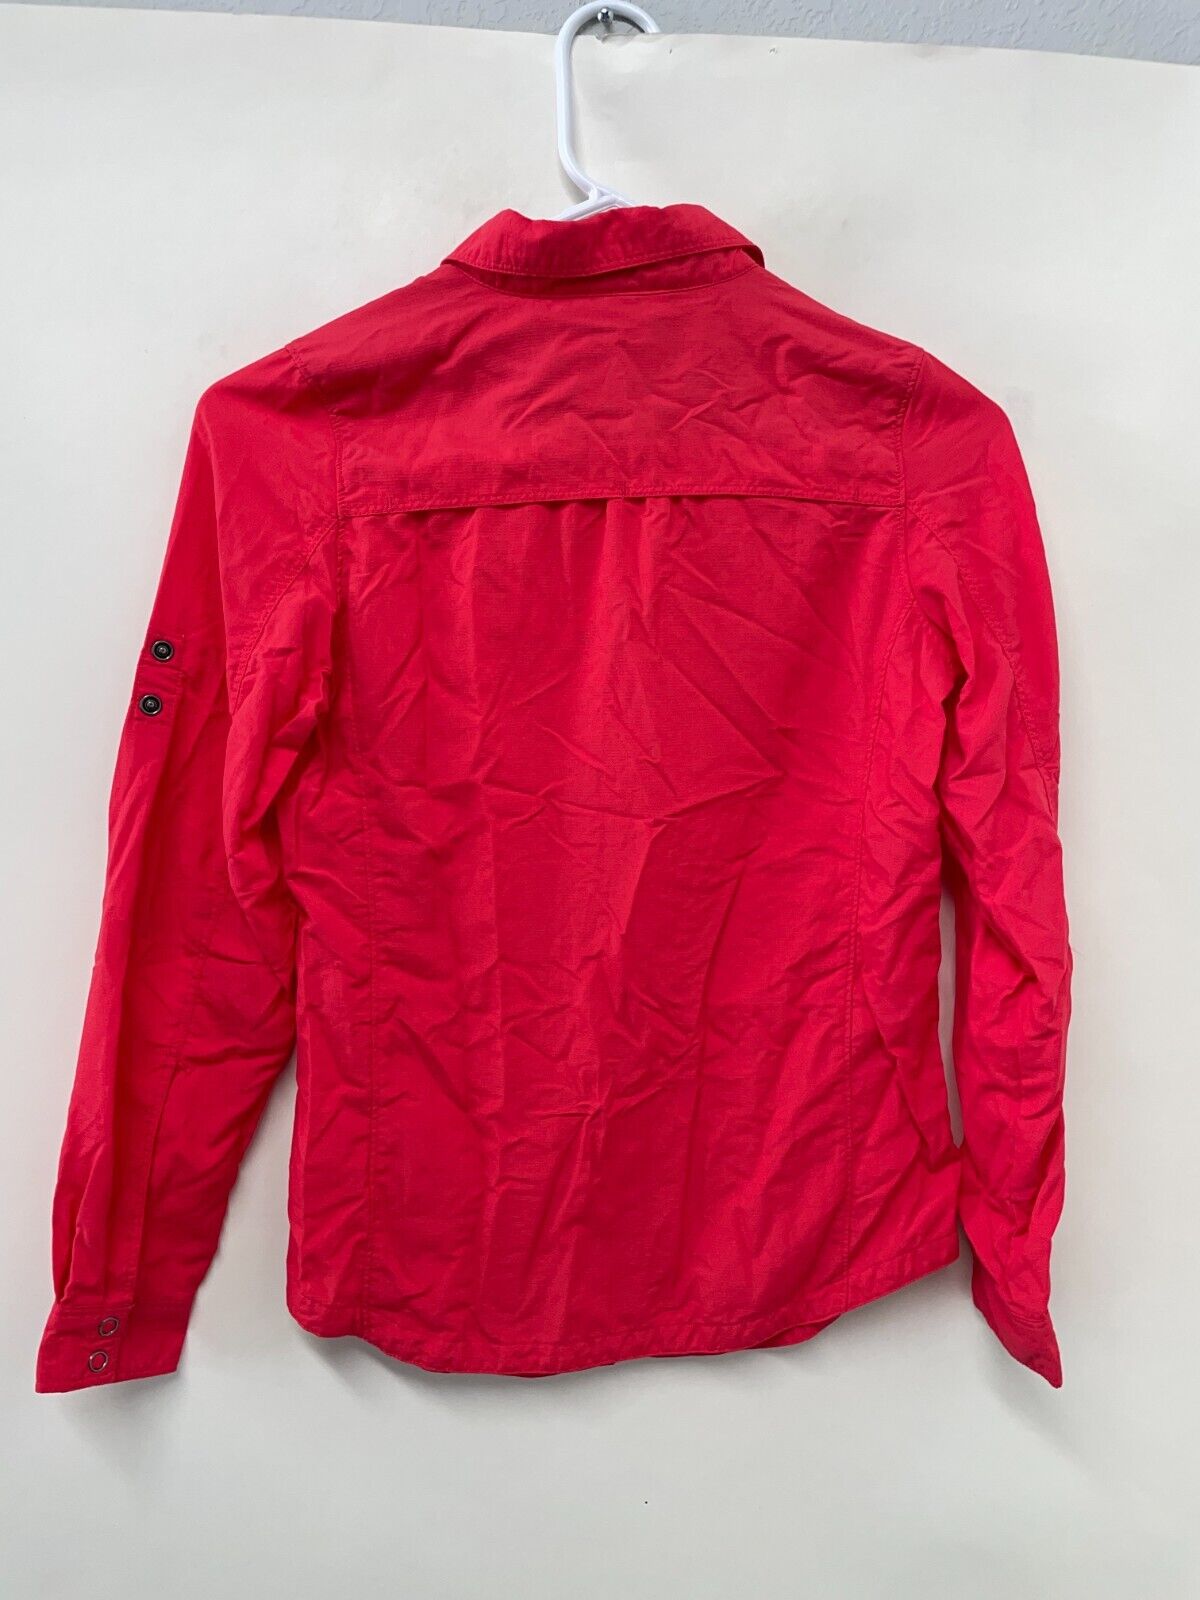 REI Girls M (10-12) Hiking Camping Shirt Red Long Sleeve Snap Button Collared